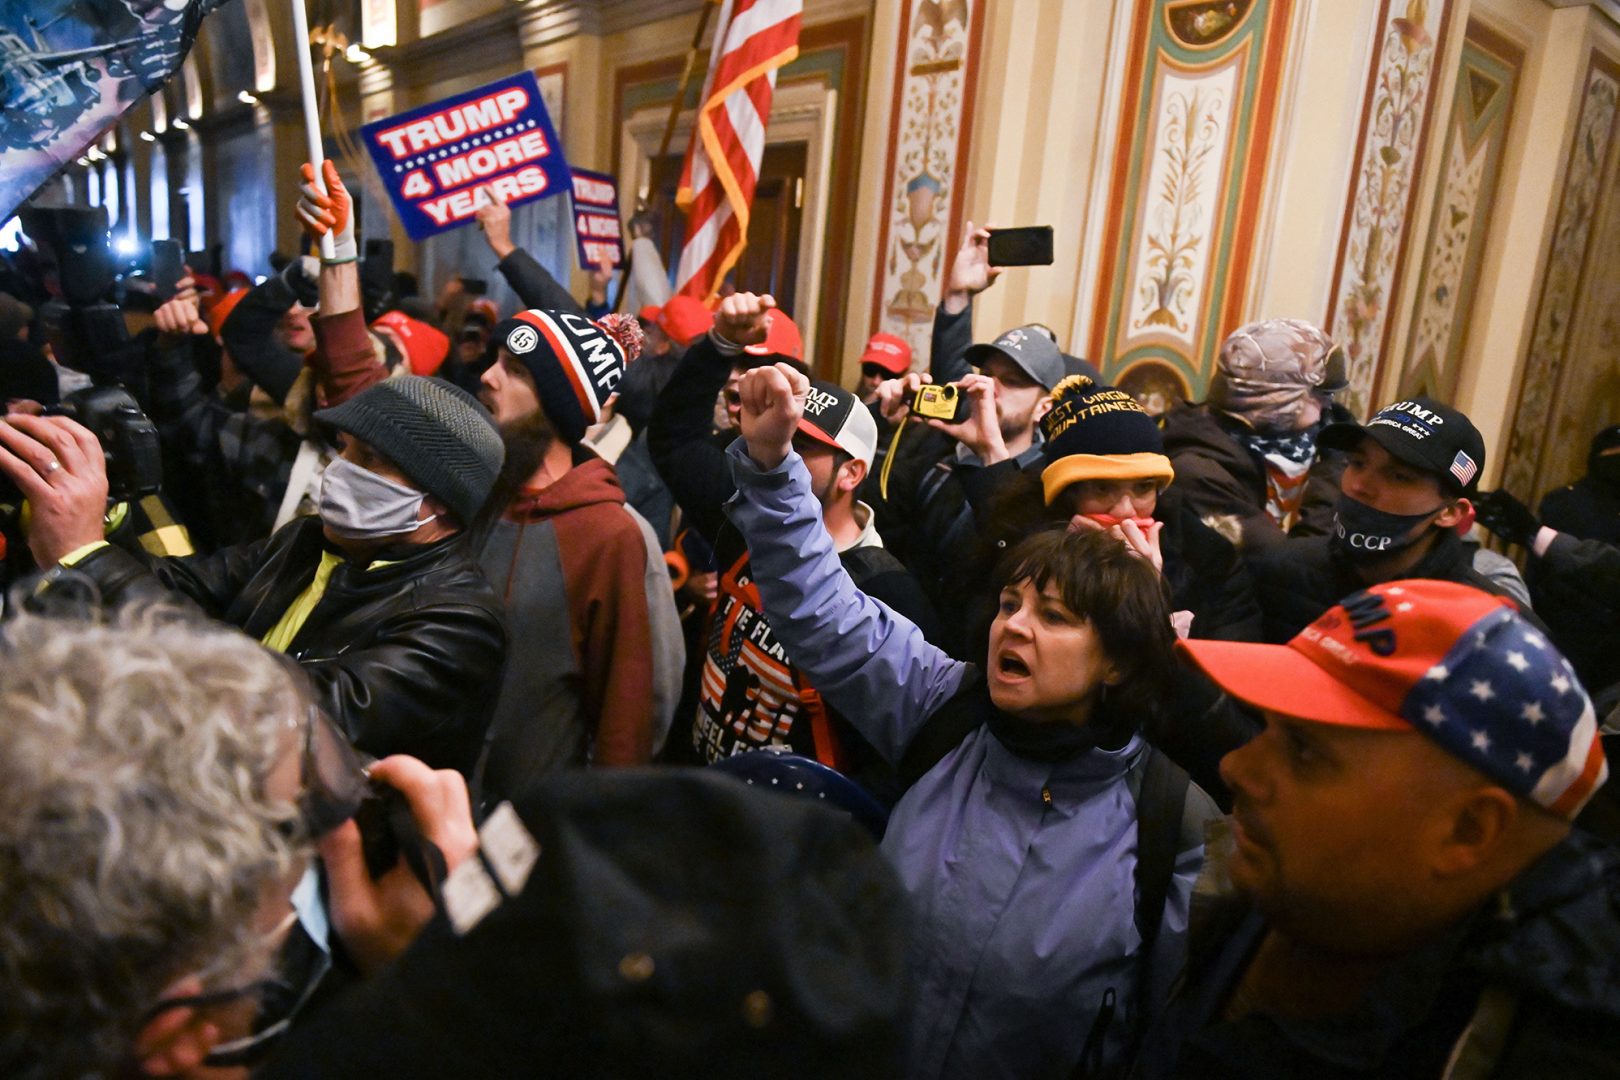 A mob breached security and stormed inside the U.S. Capitol on Jan. 6. The woman in blue with her fist raised was later identified as Suzanne Ianni.